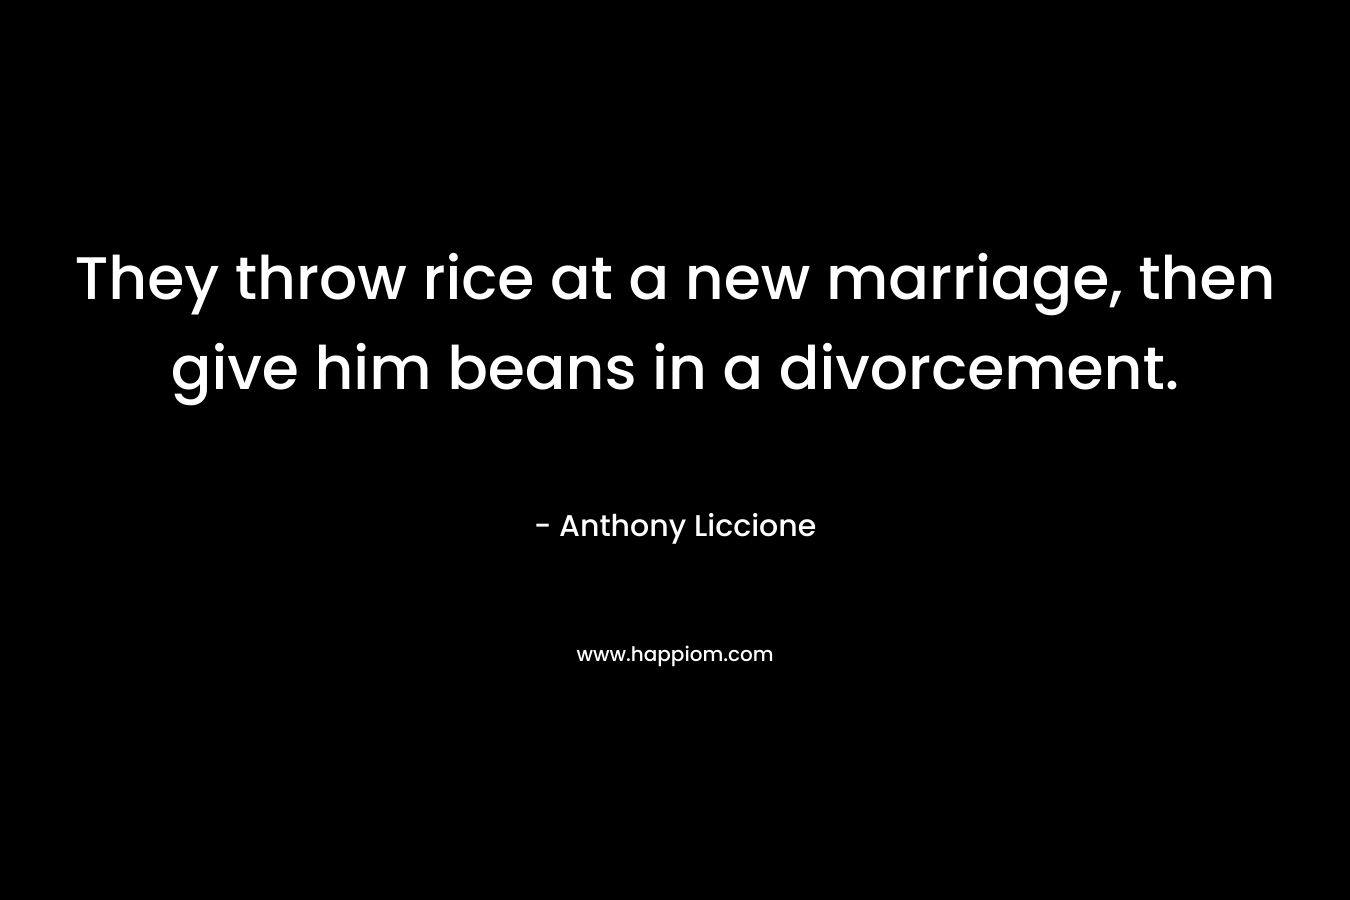 They throw rice at a new marriage, then give him beans in a divorcement.